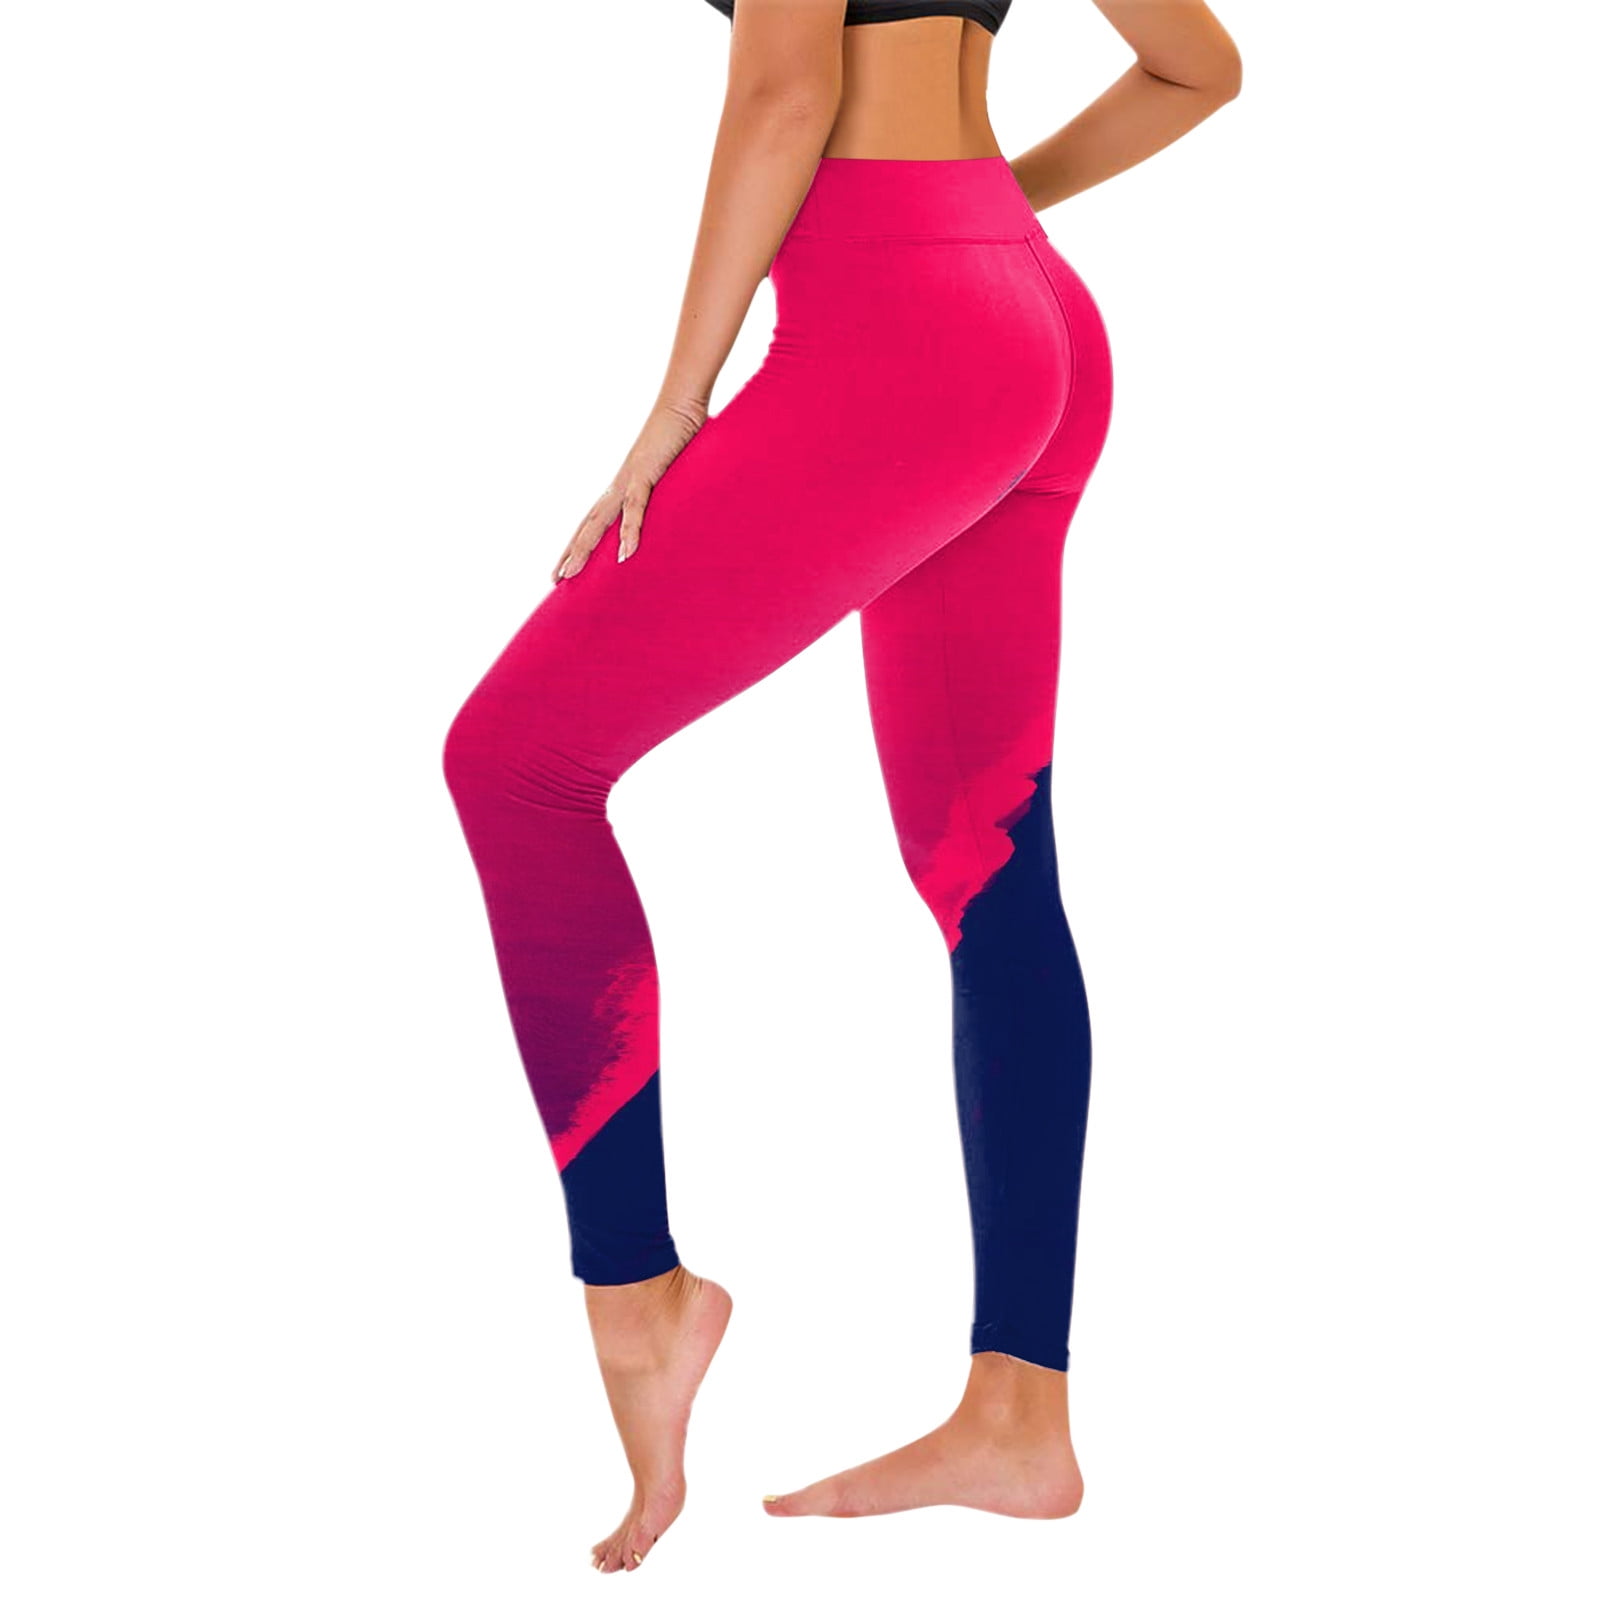 BLVB Yoga Leggings for Women Stretch High Waist Gradient Gym Sports Pants  Scrunch Workout Athletic Tights 